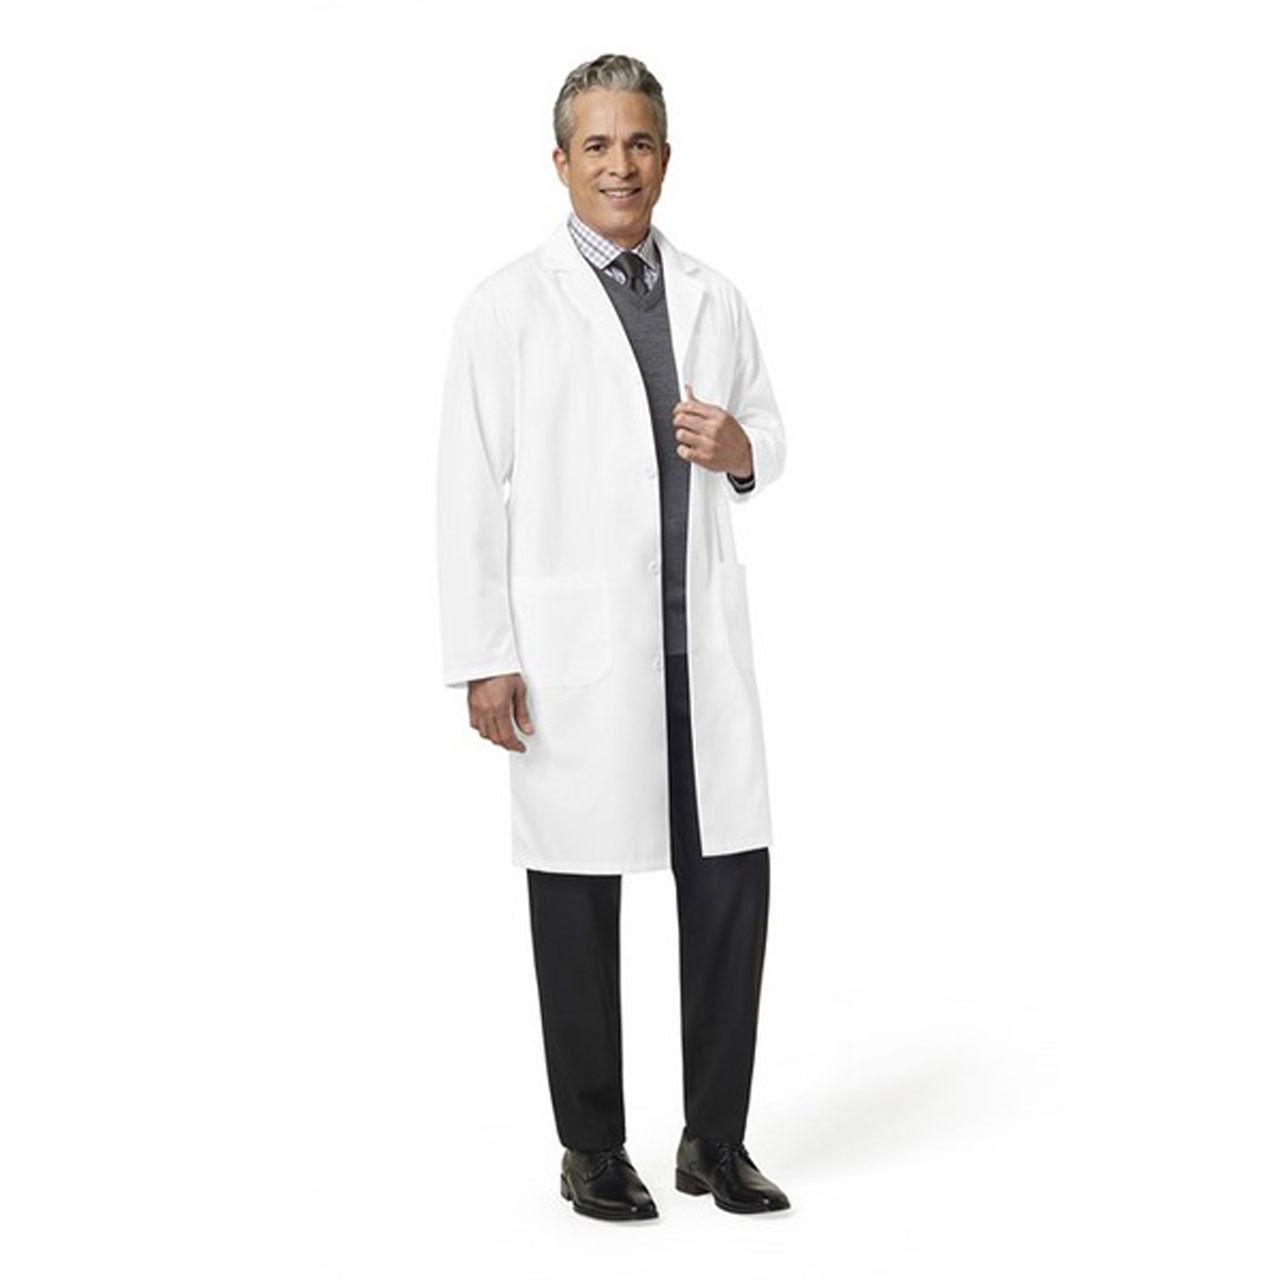 What material are the bulk lab coats made of?